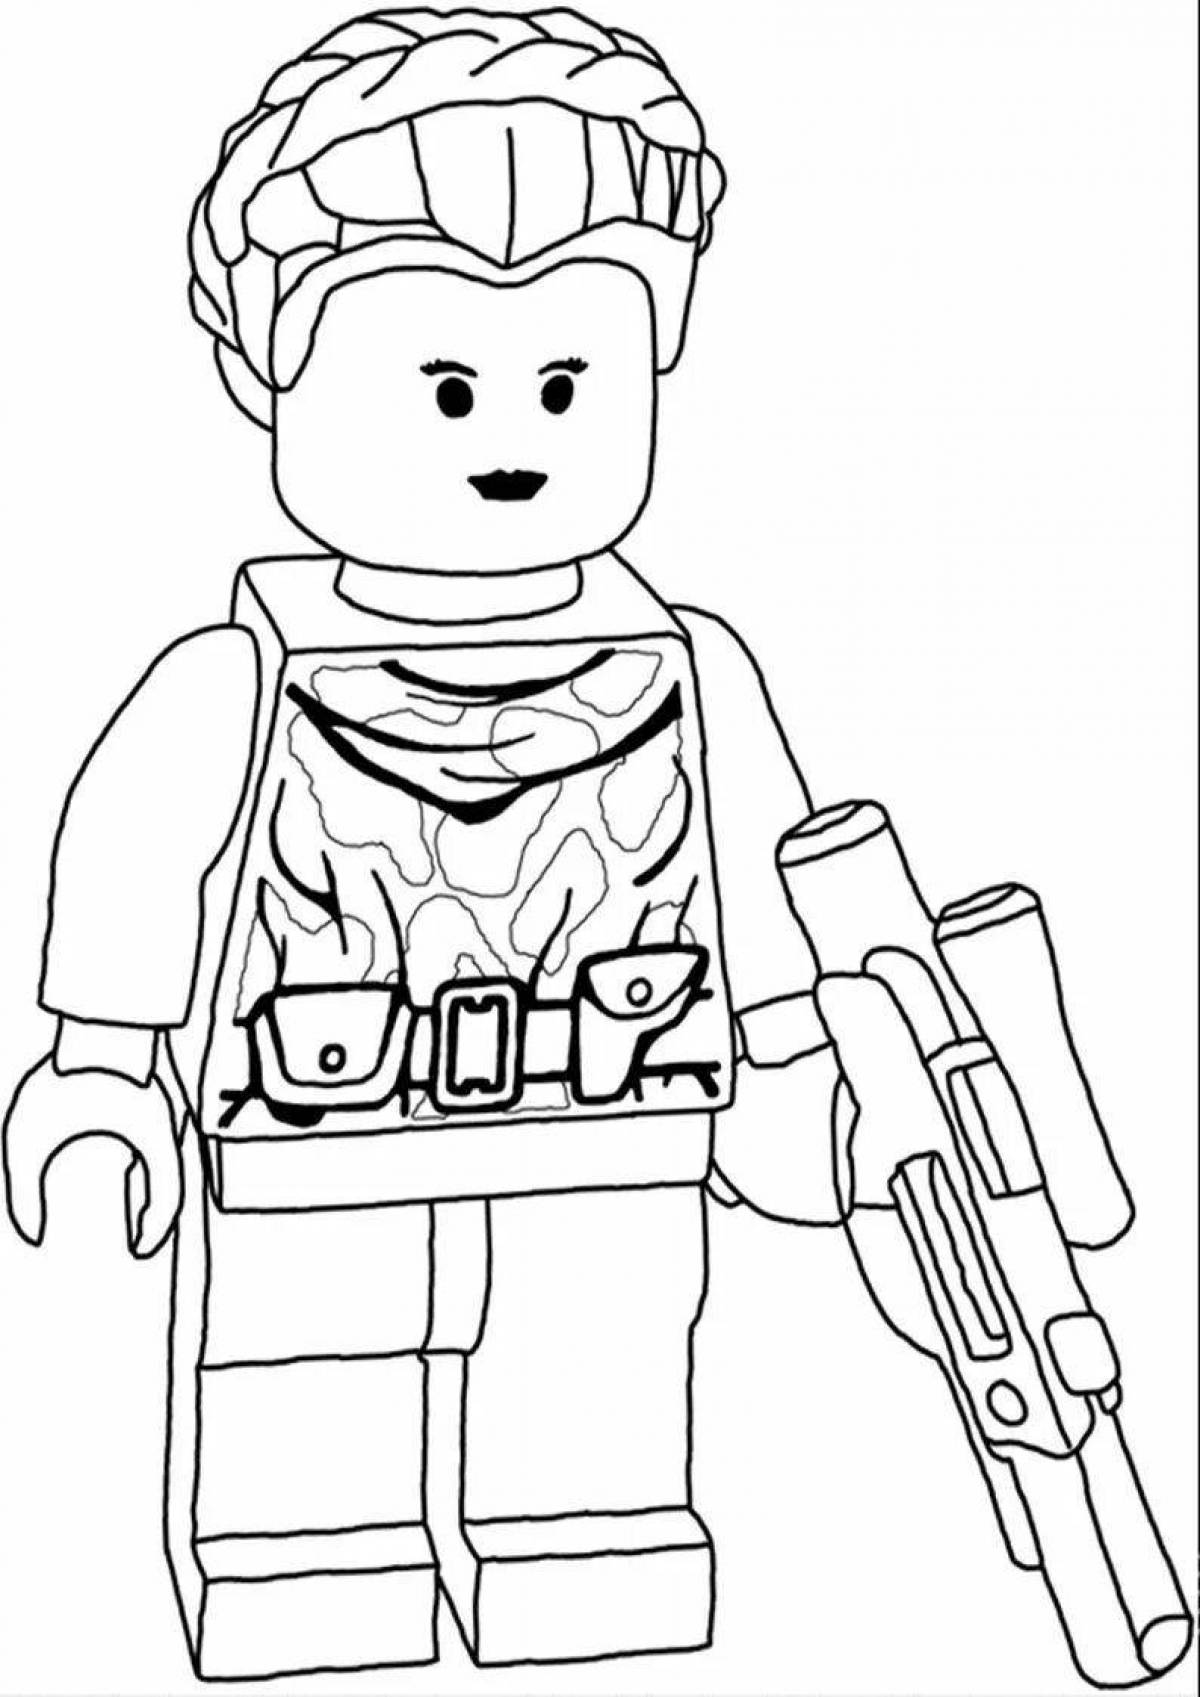 Great Soldier Coloring Pages for Boys